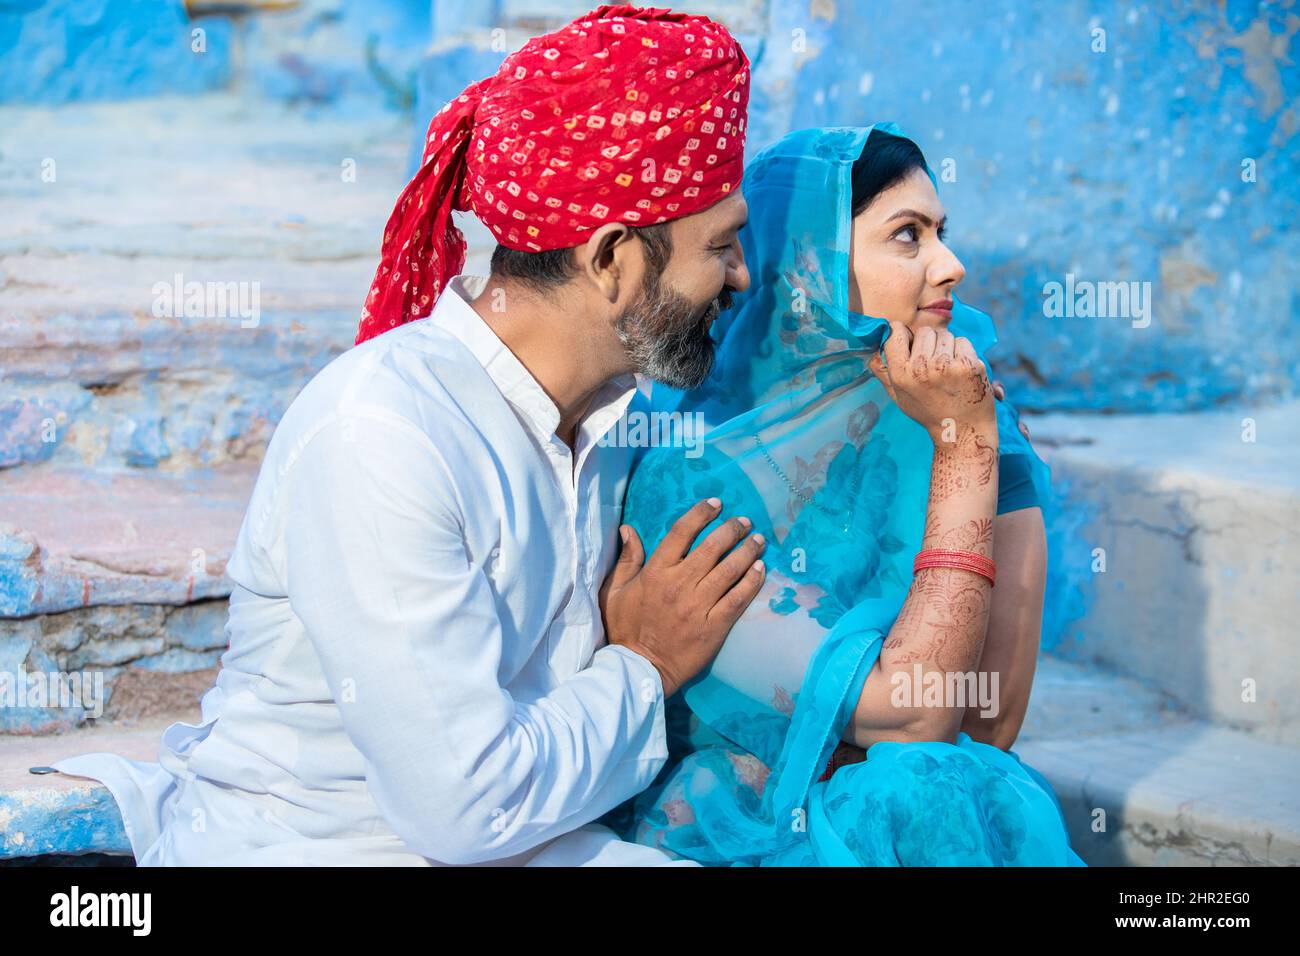 Indian wife wearing sari upset with her husband, man show support to to unhappy offended woman, caring man make peace and reconcile with lover, family Stock Photo